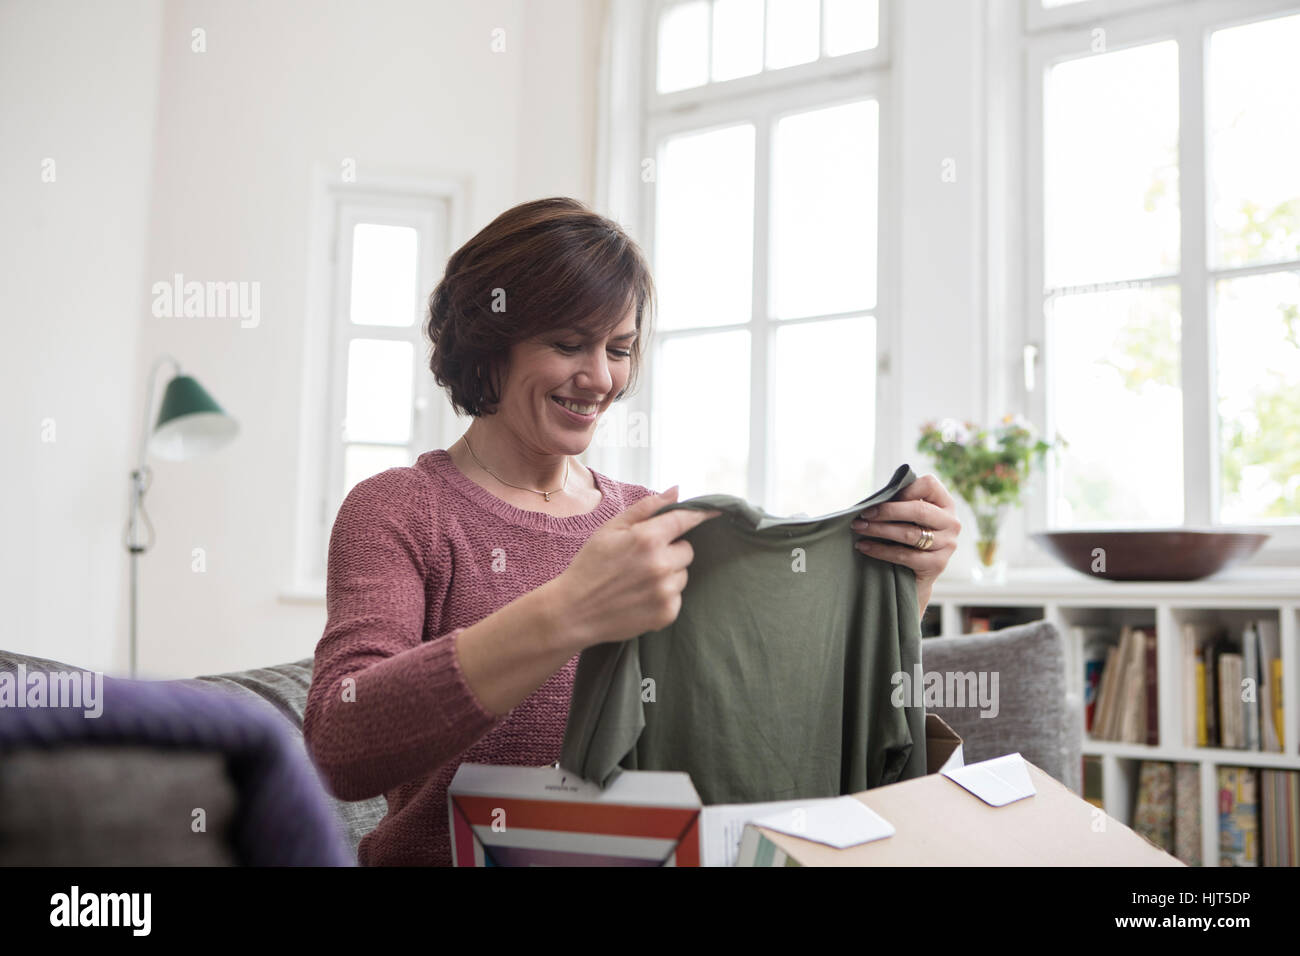 Smiling woman at home sitting on the sofa looking at garment Stock Photo